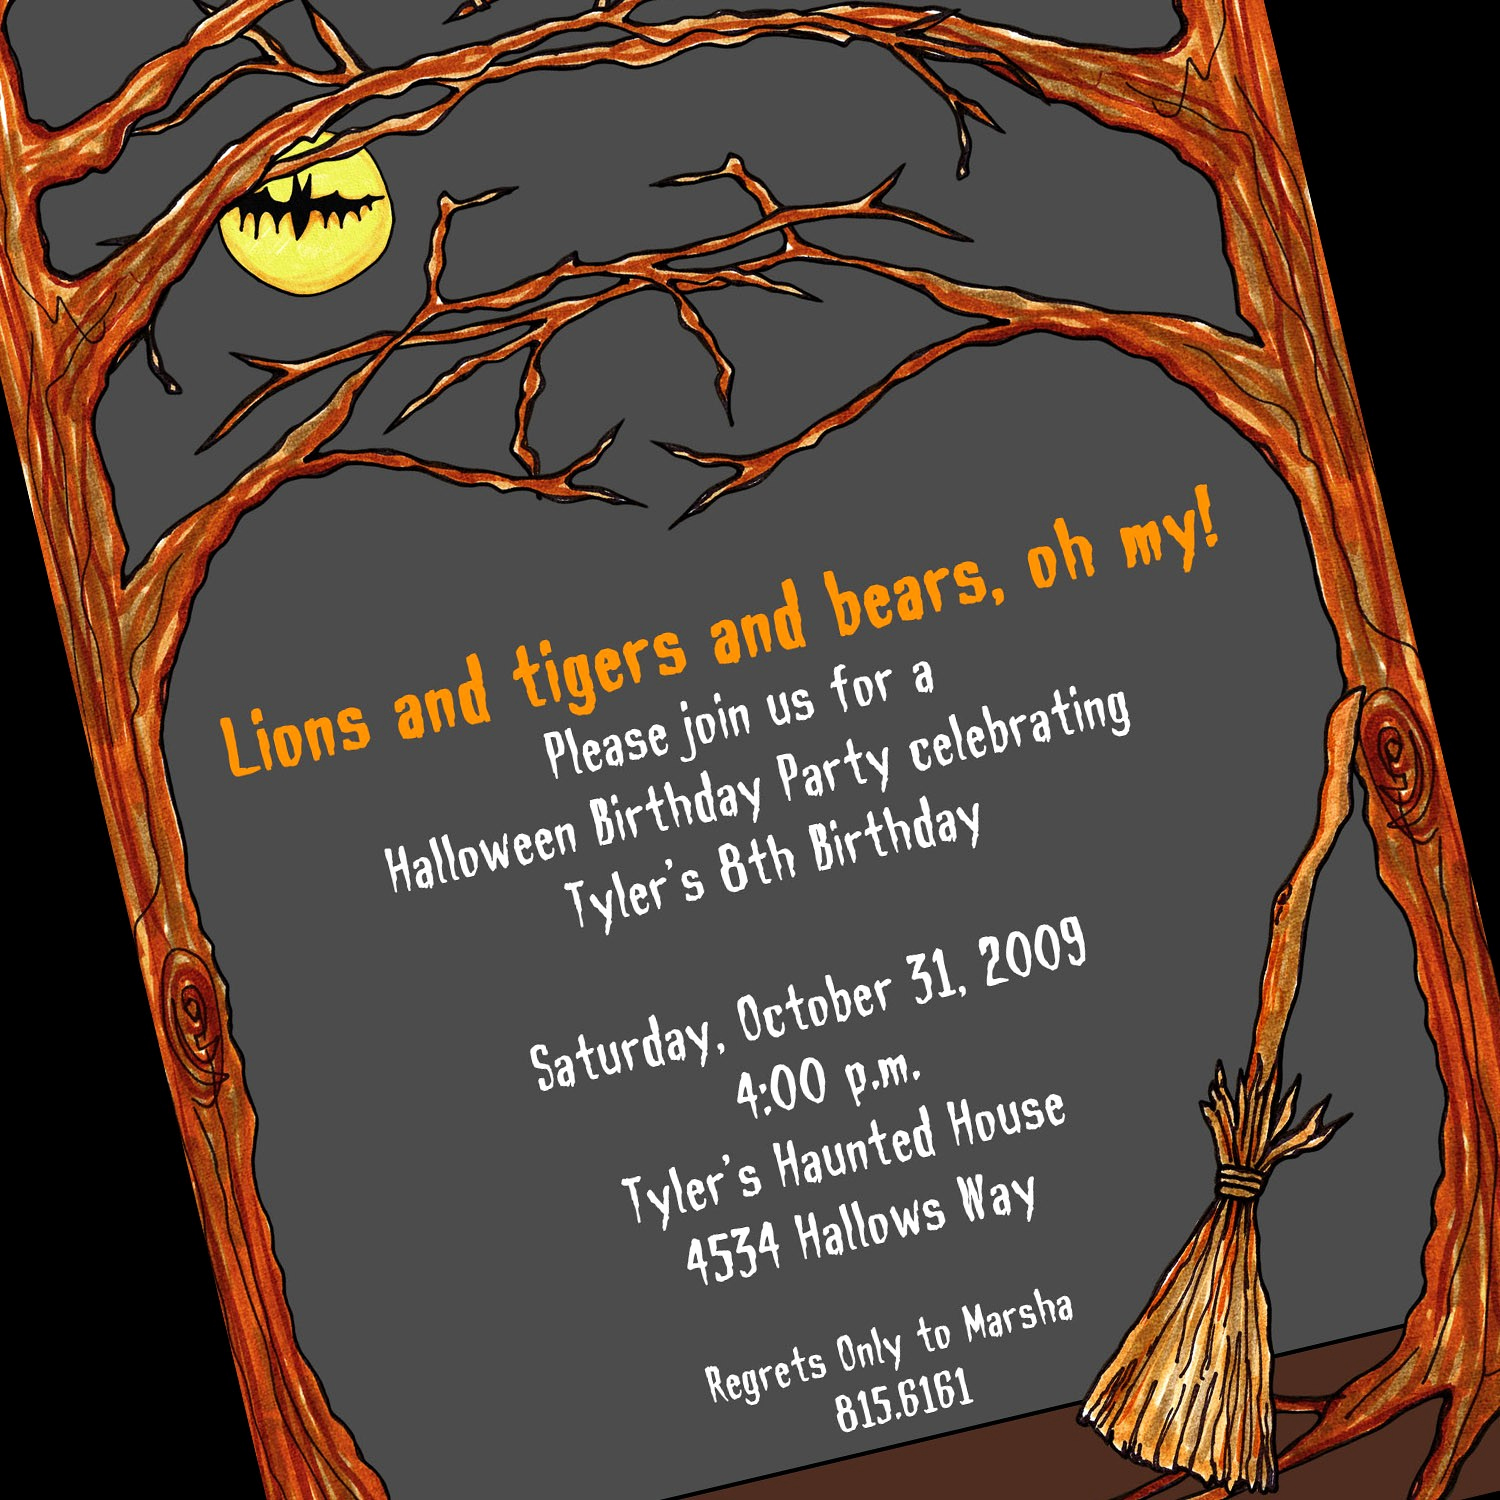 Halloween Invitation Wording Adults Only Fresh Halloween Invitation Wording byob – Festival Collections